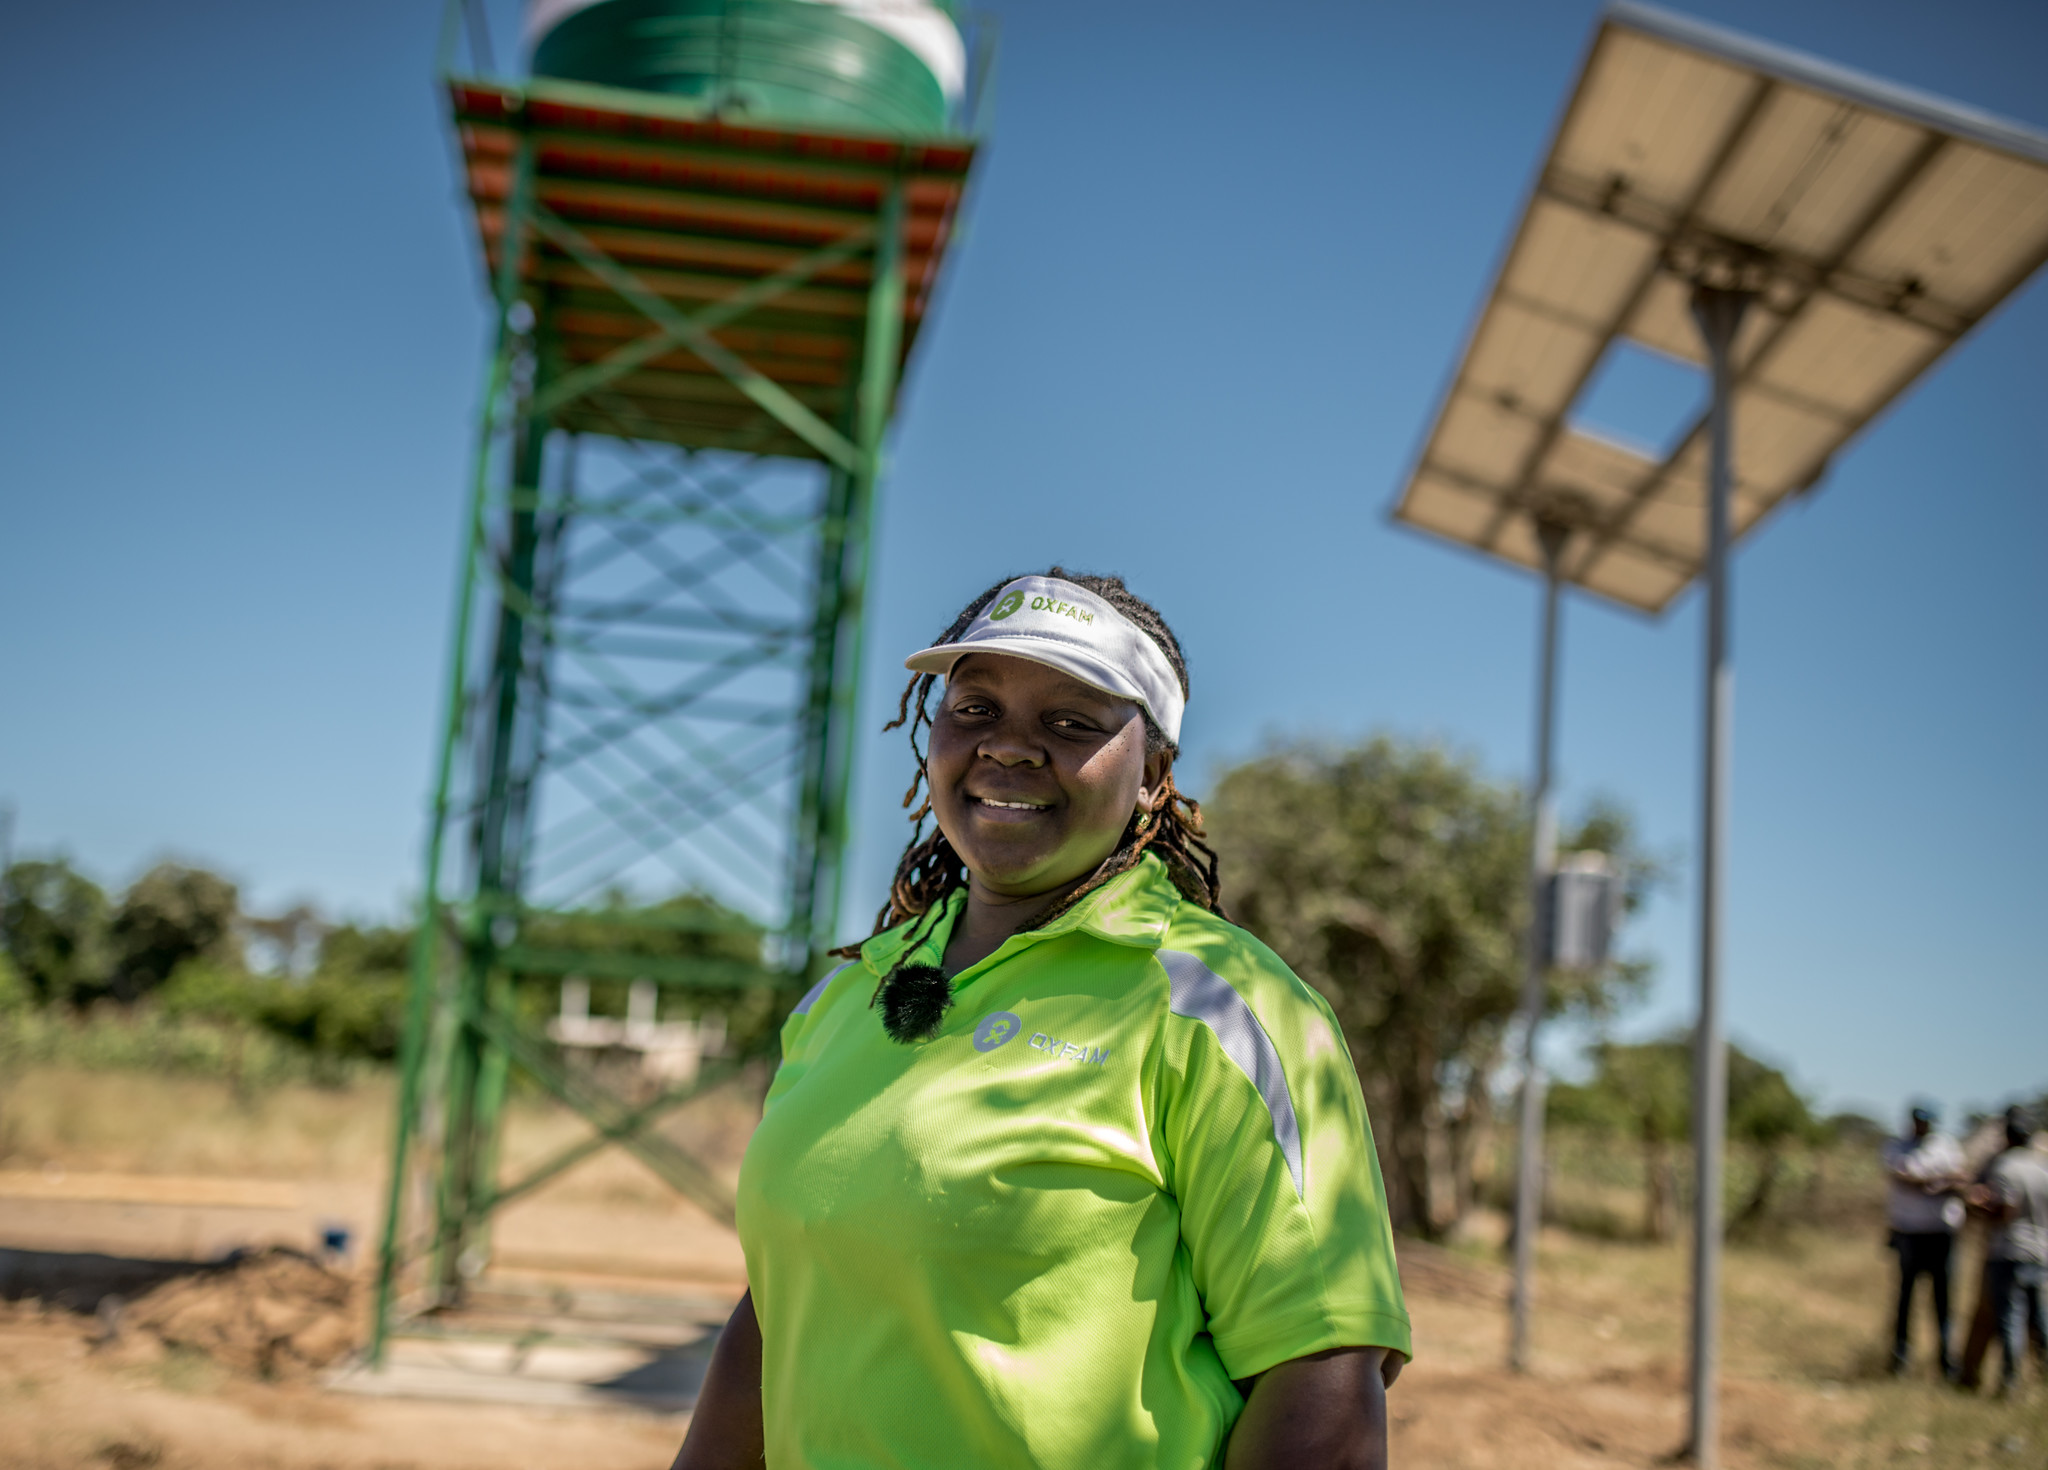  Takudzwa at the Oxfam-funded solar piped water system